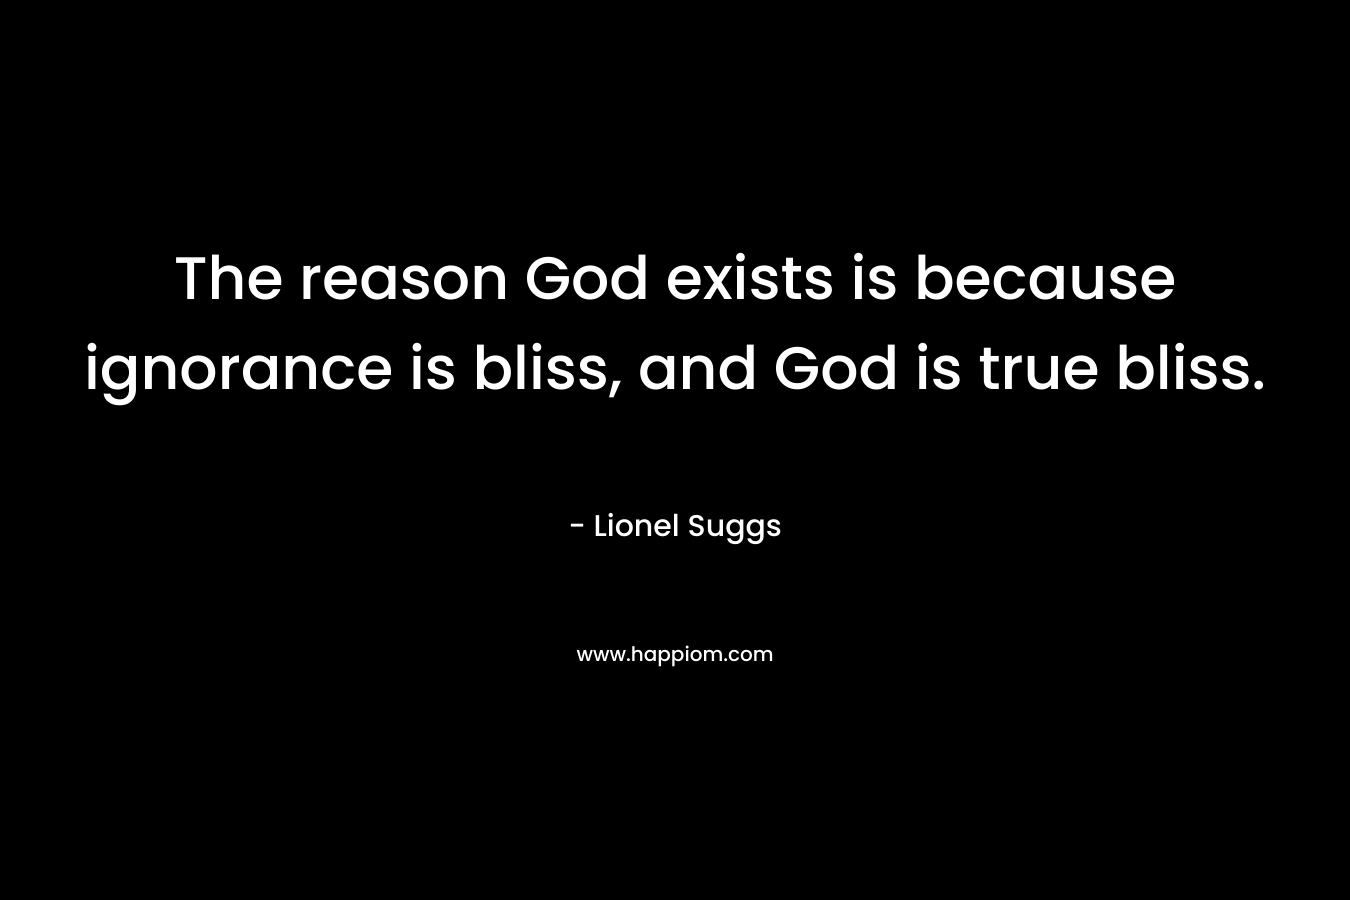 The reason God exists is because ignorance is bliss, and God is true bliss.